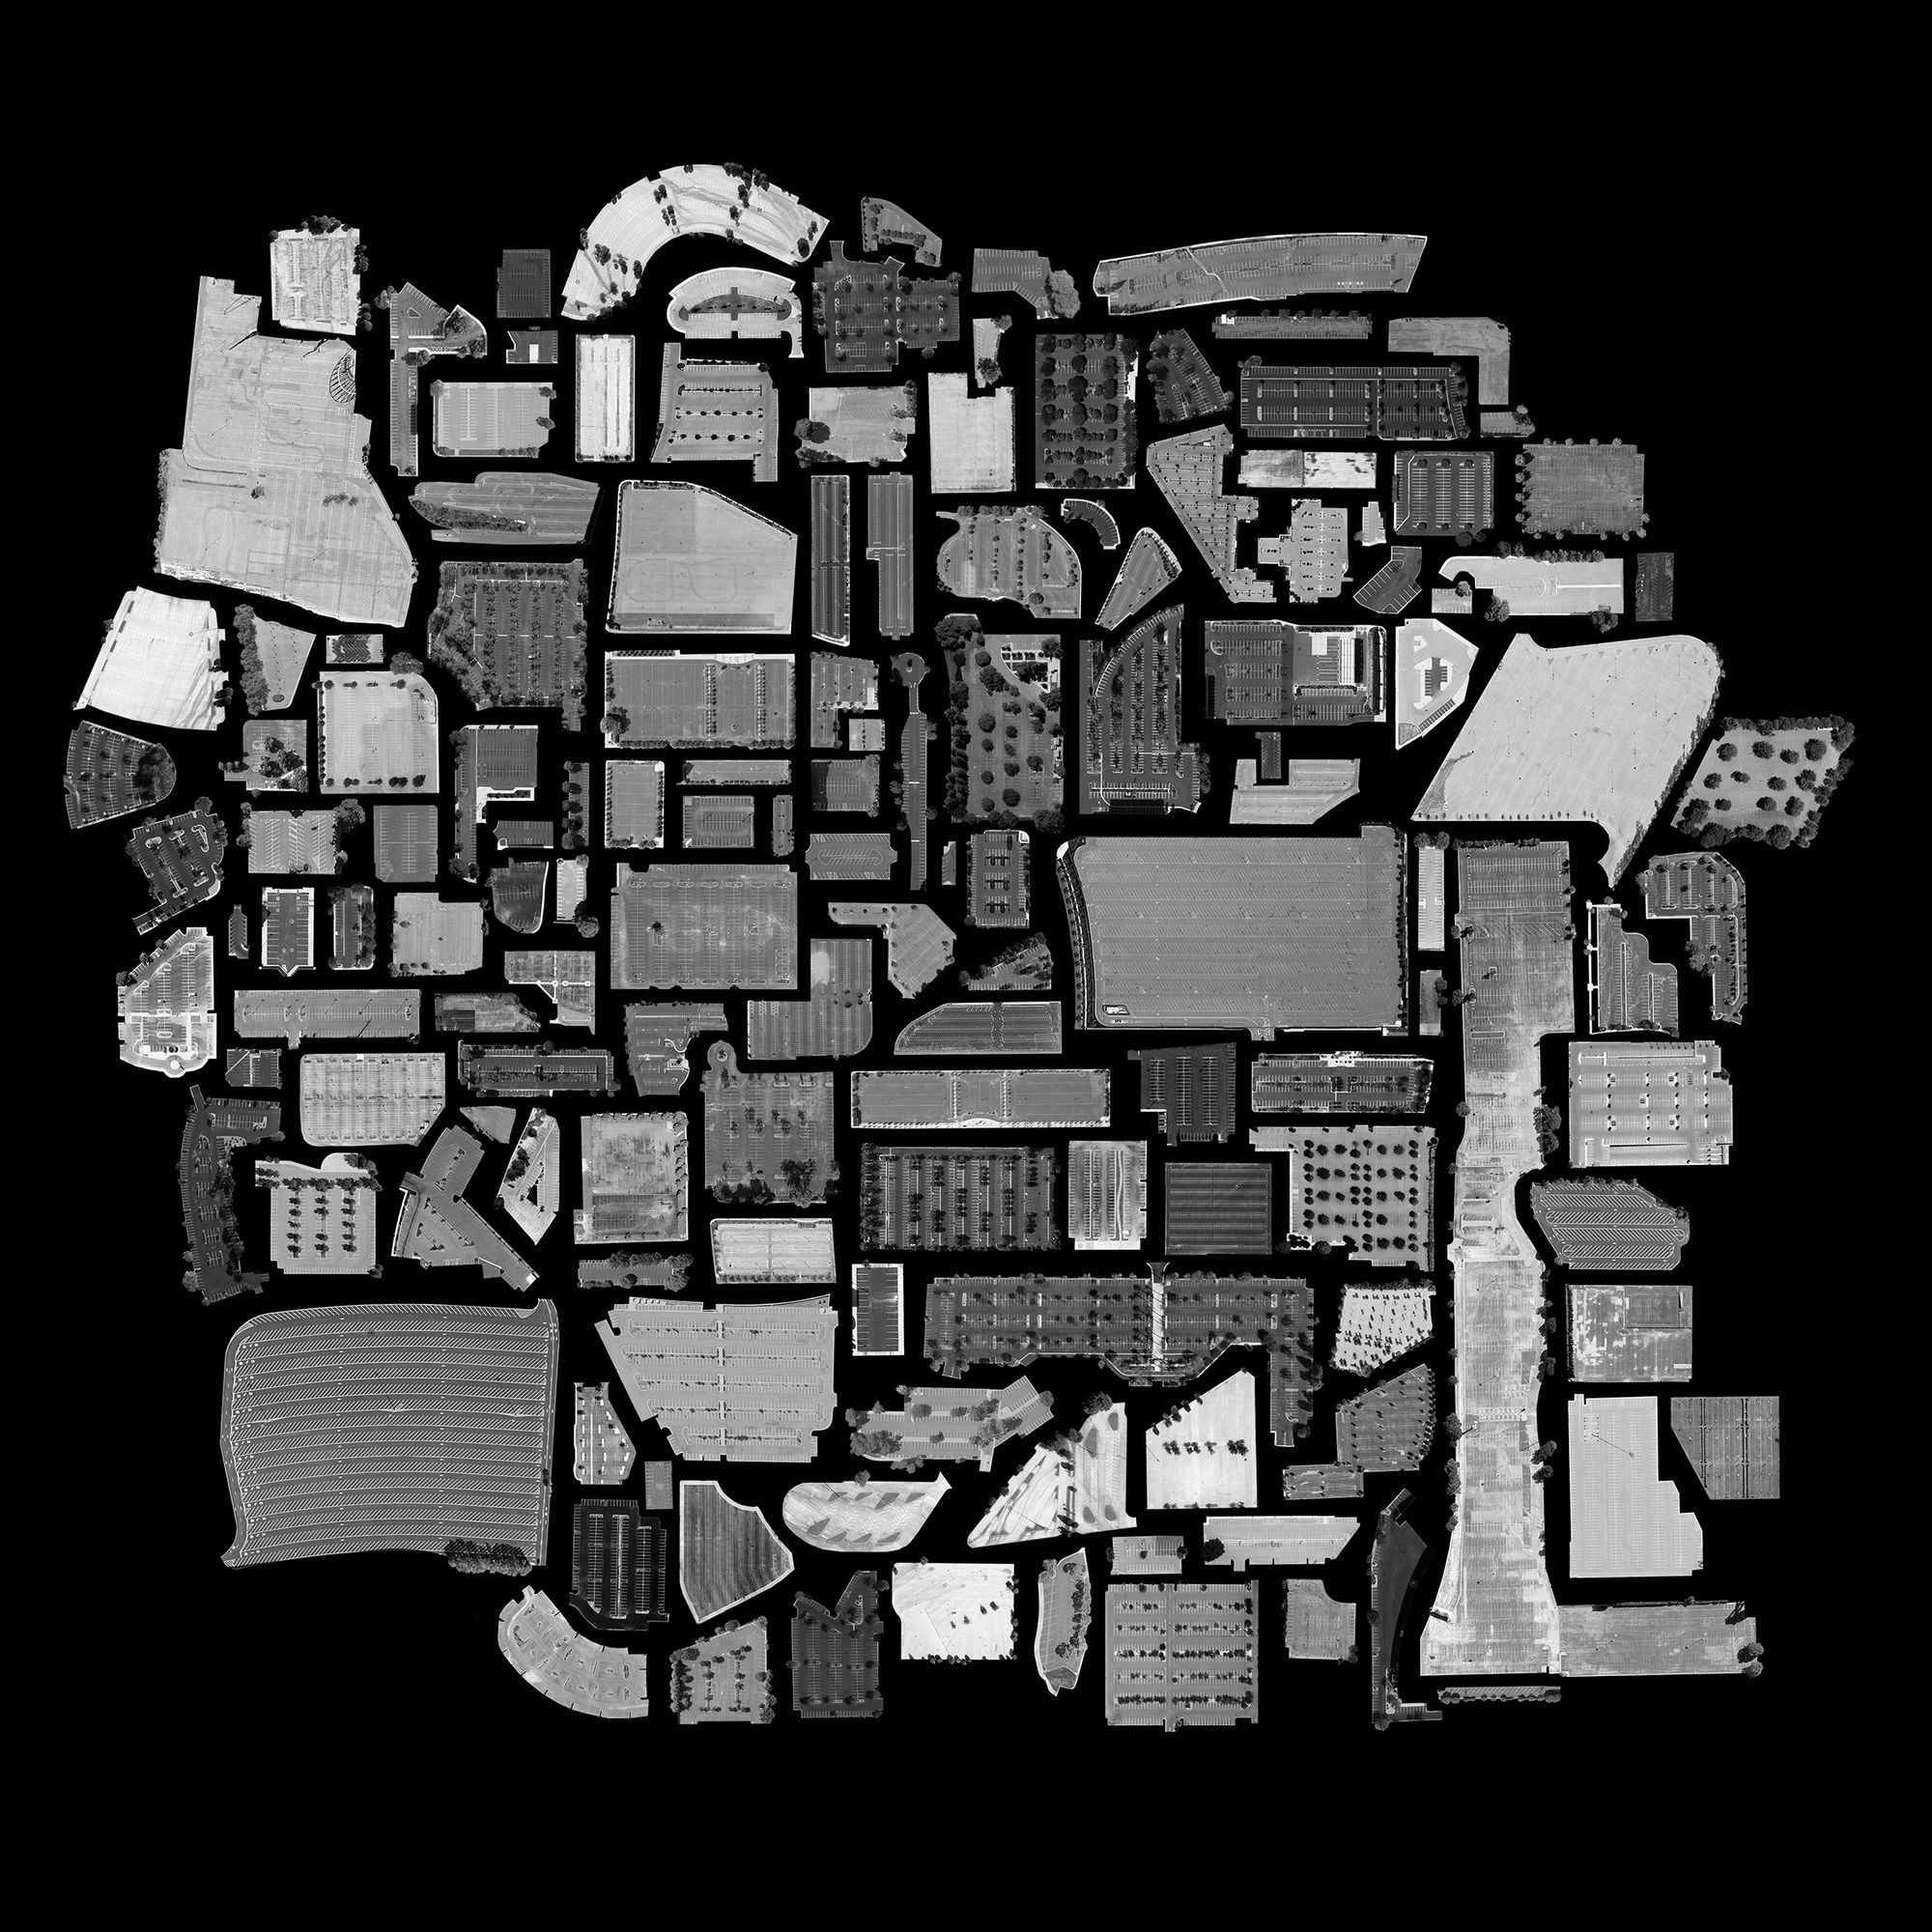 An aerial view of 144 parking lots in black and white, collaged to fit perfectly together.